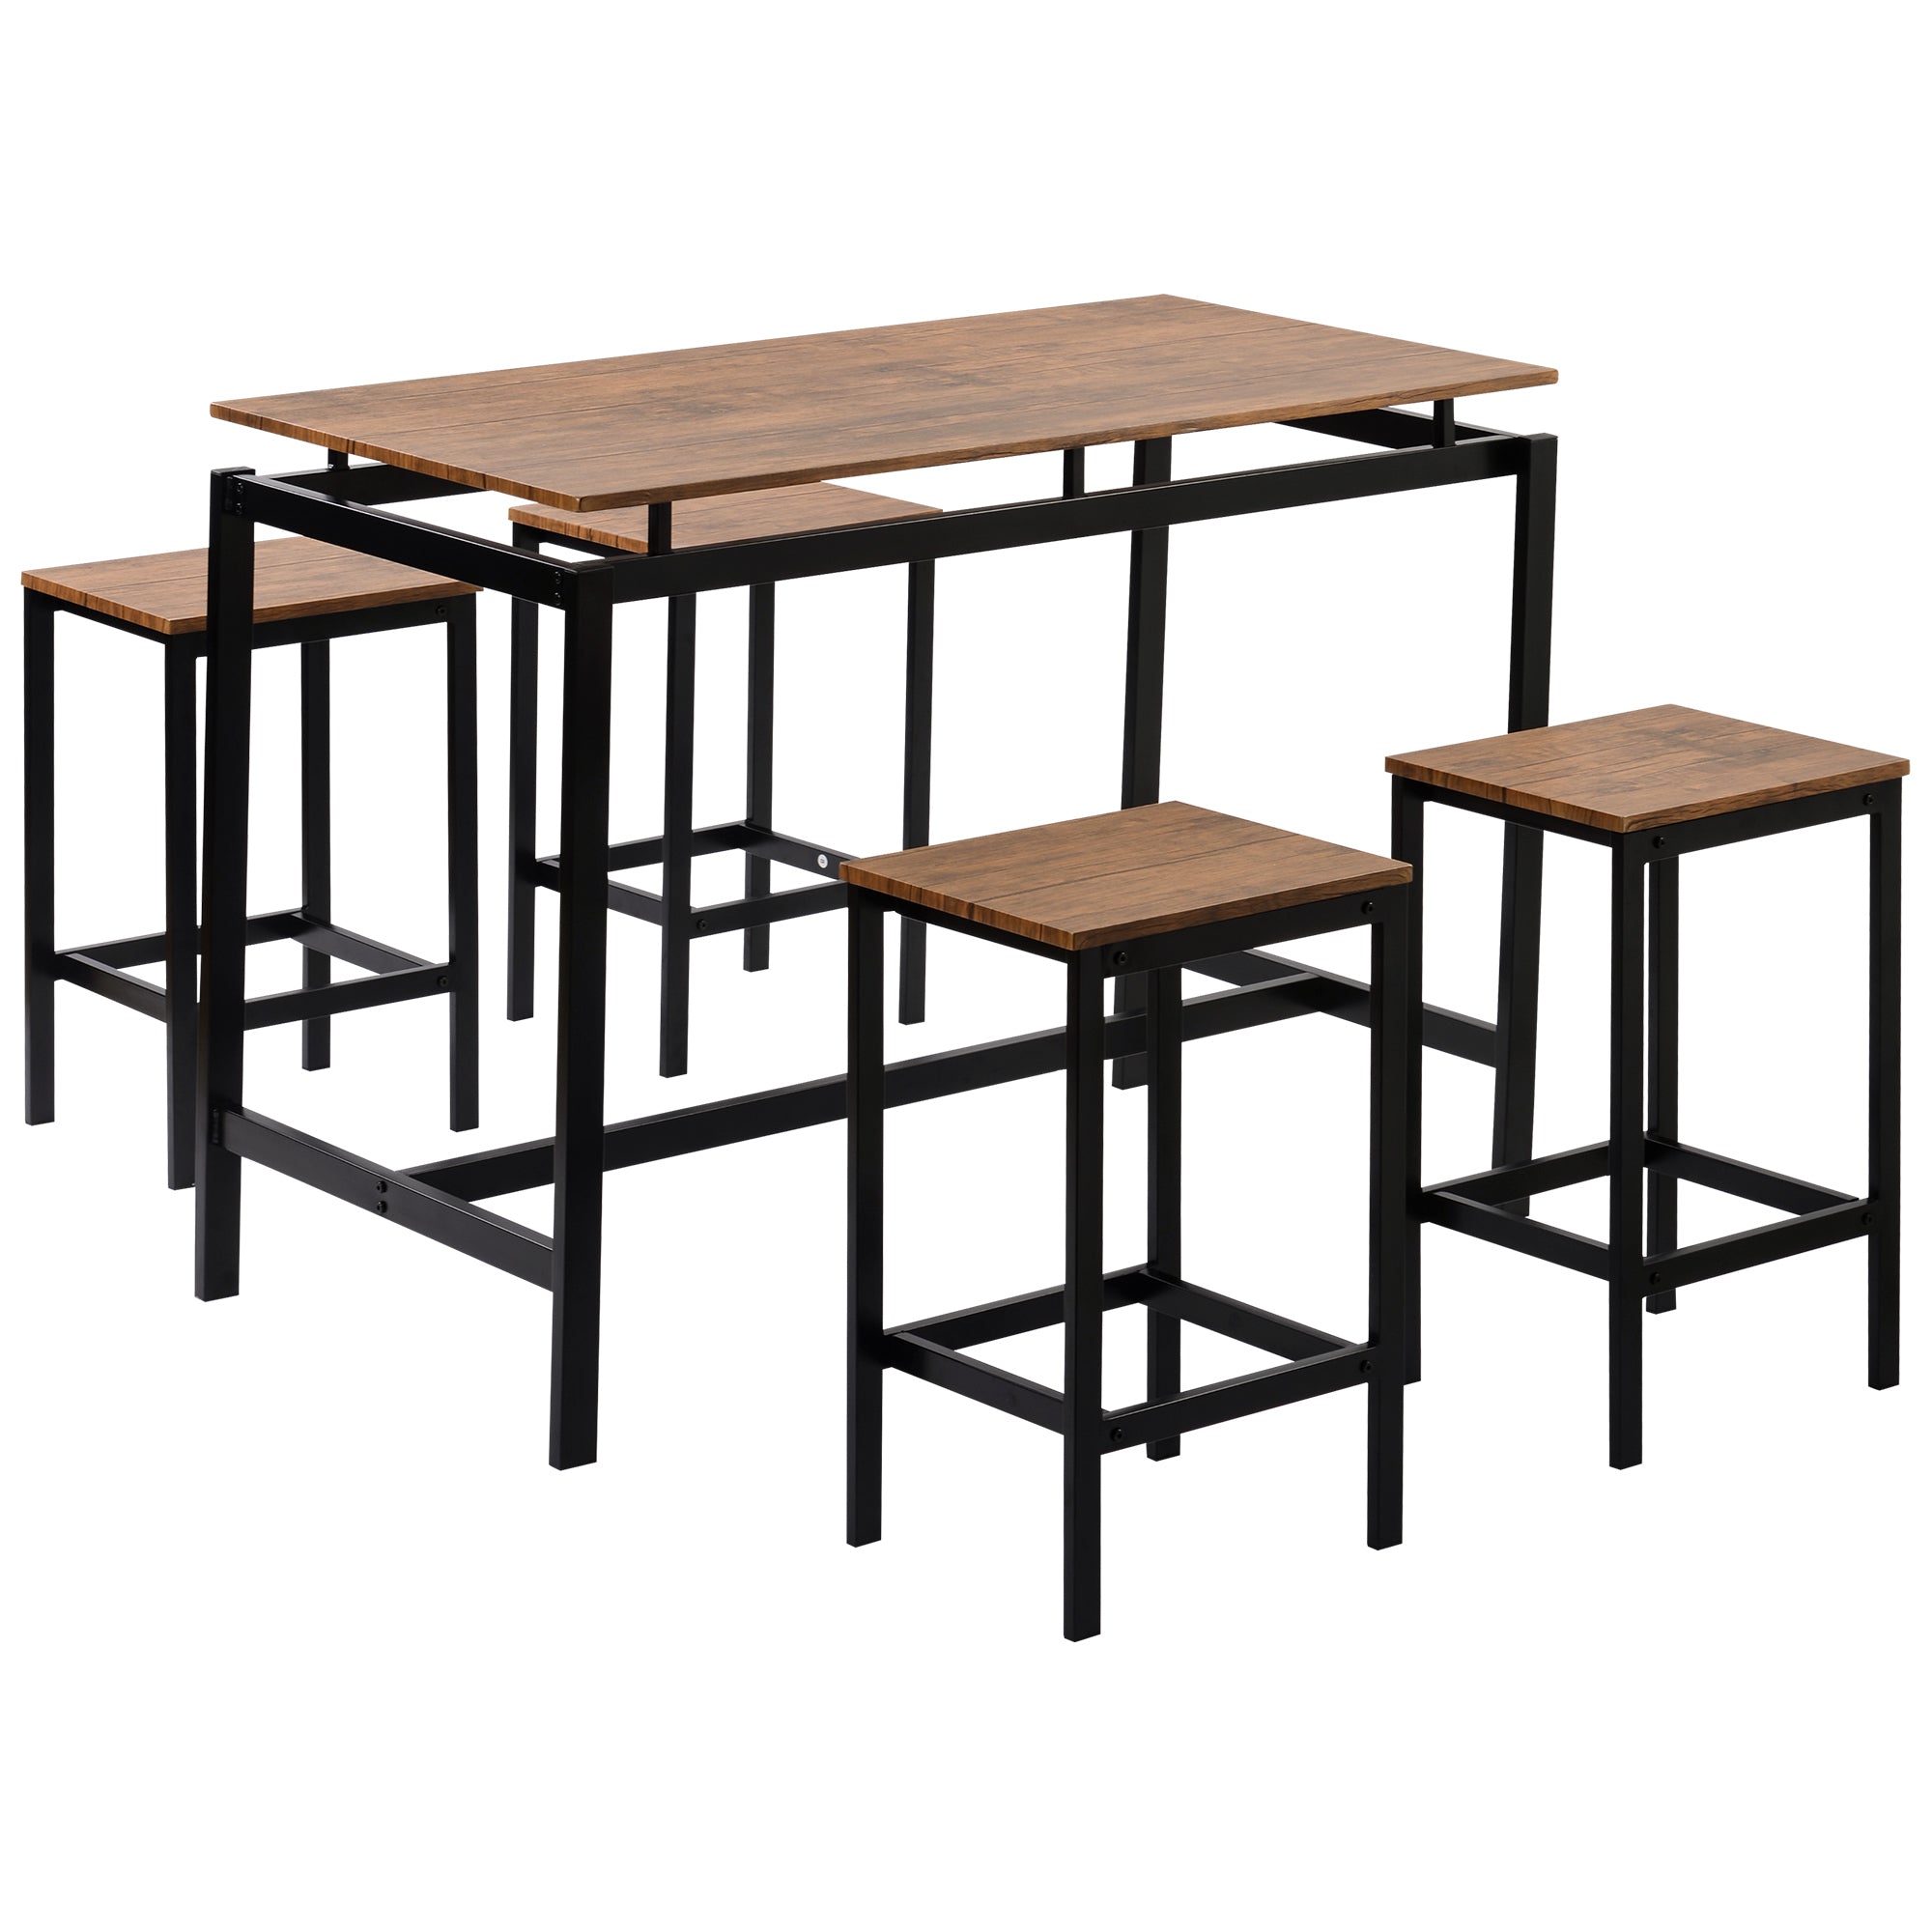 TREXM Set of 5 Industrial Dining Table with 4 Chairs (Brown)